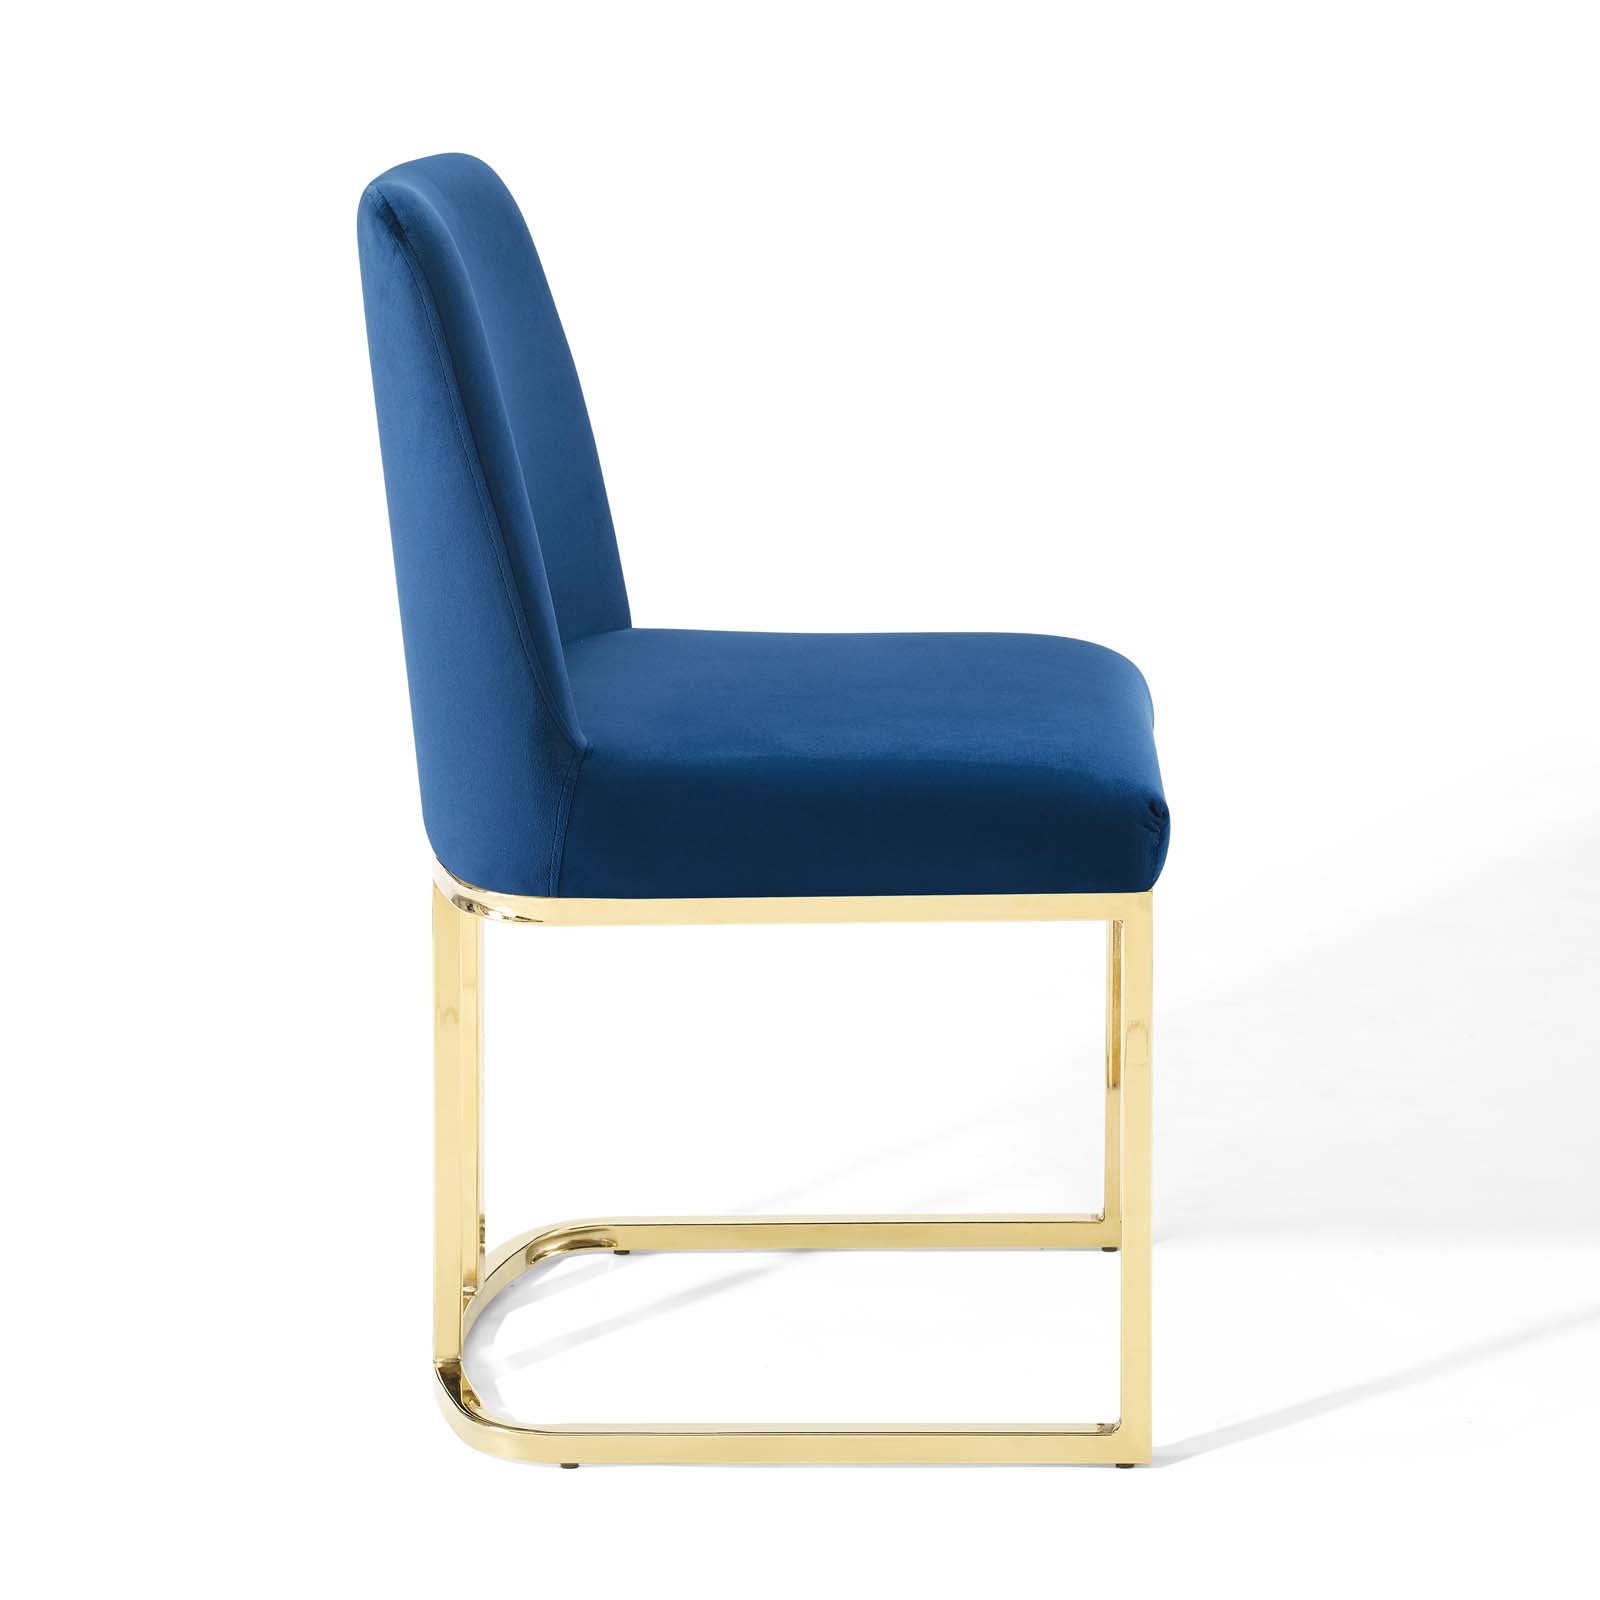 Modway Dining Chairs - Amplify Sled Base Performance Velvet Dining Side Chair Gold Navy